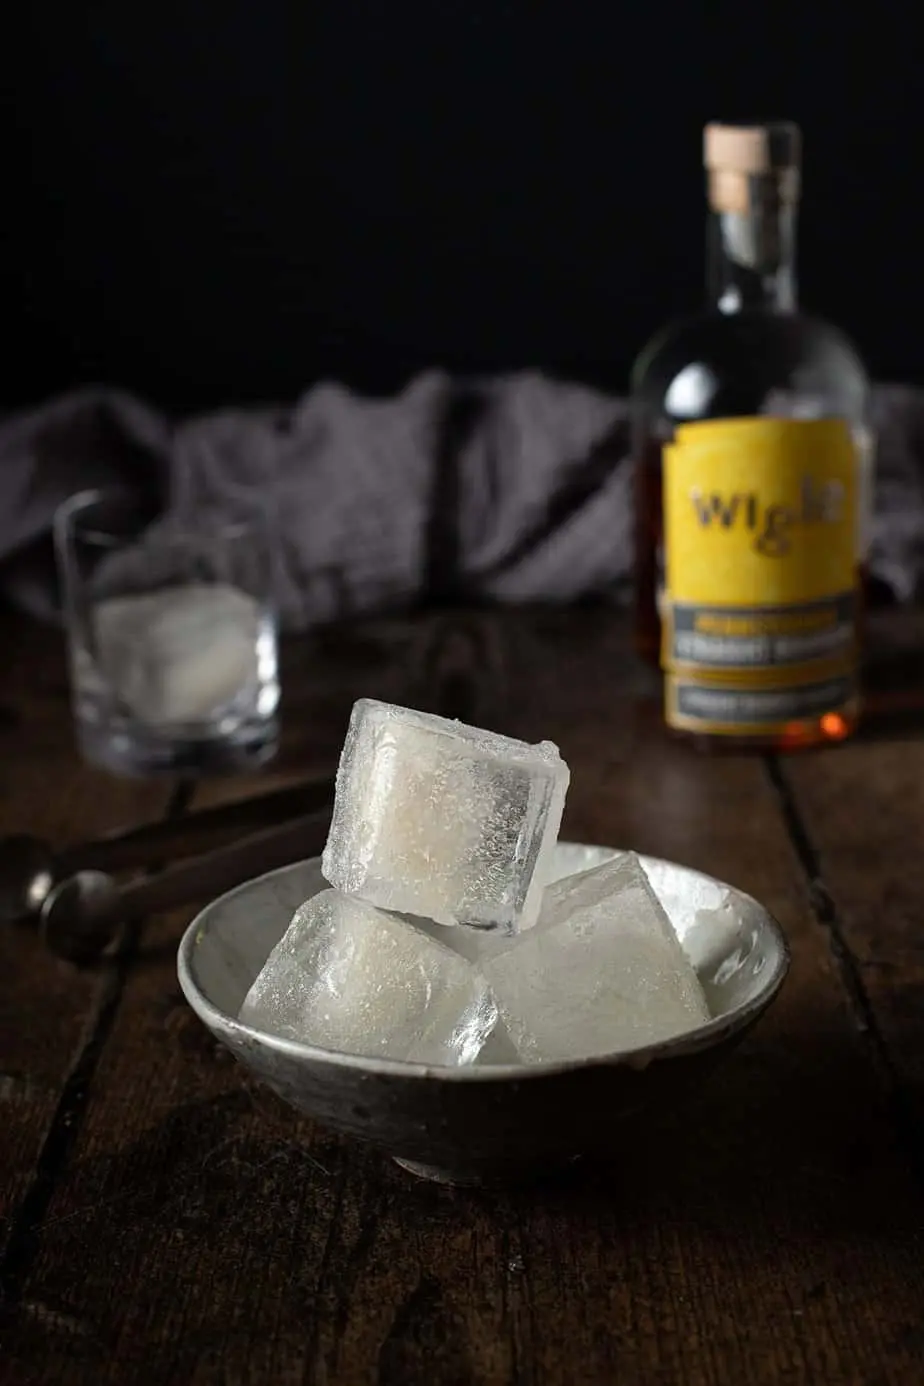 how to make smoked ice - What is the ice that makes your drink smoke